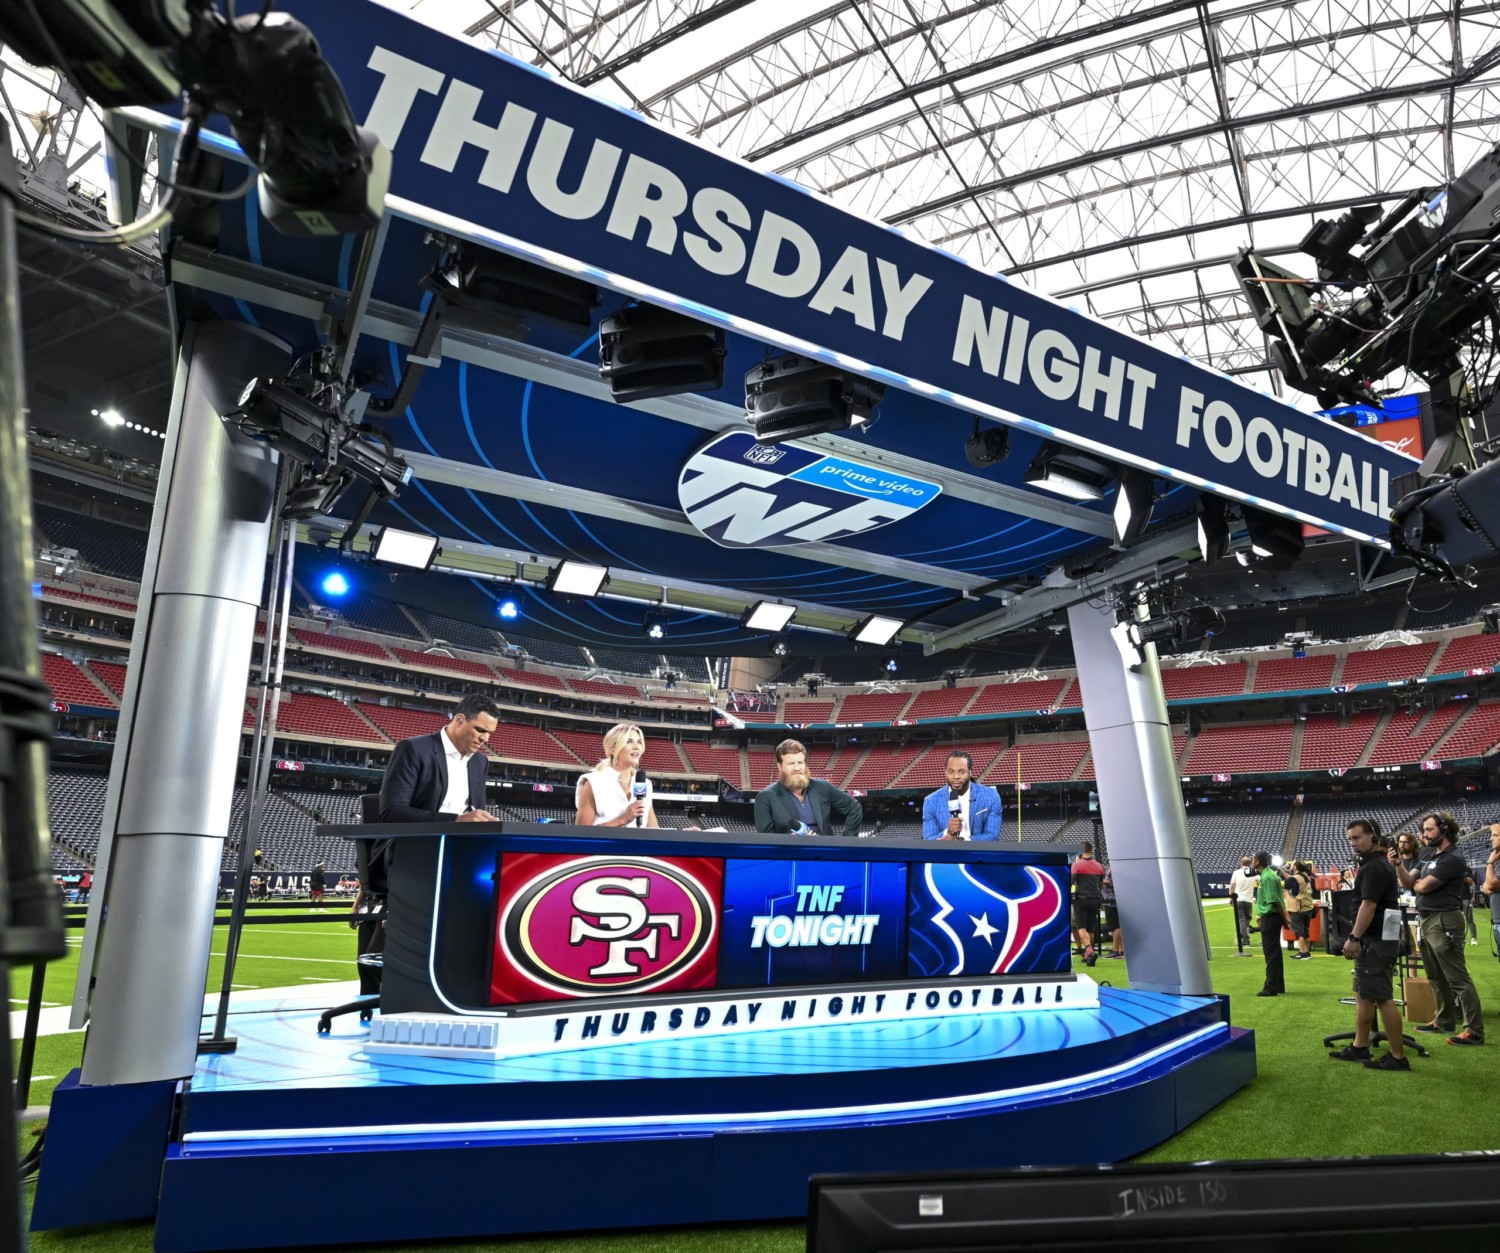 what nfl team is playing thursday night football tonight